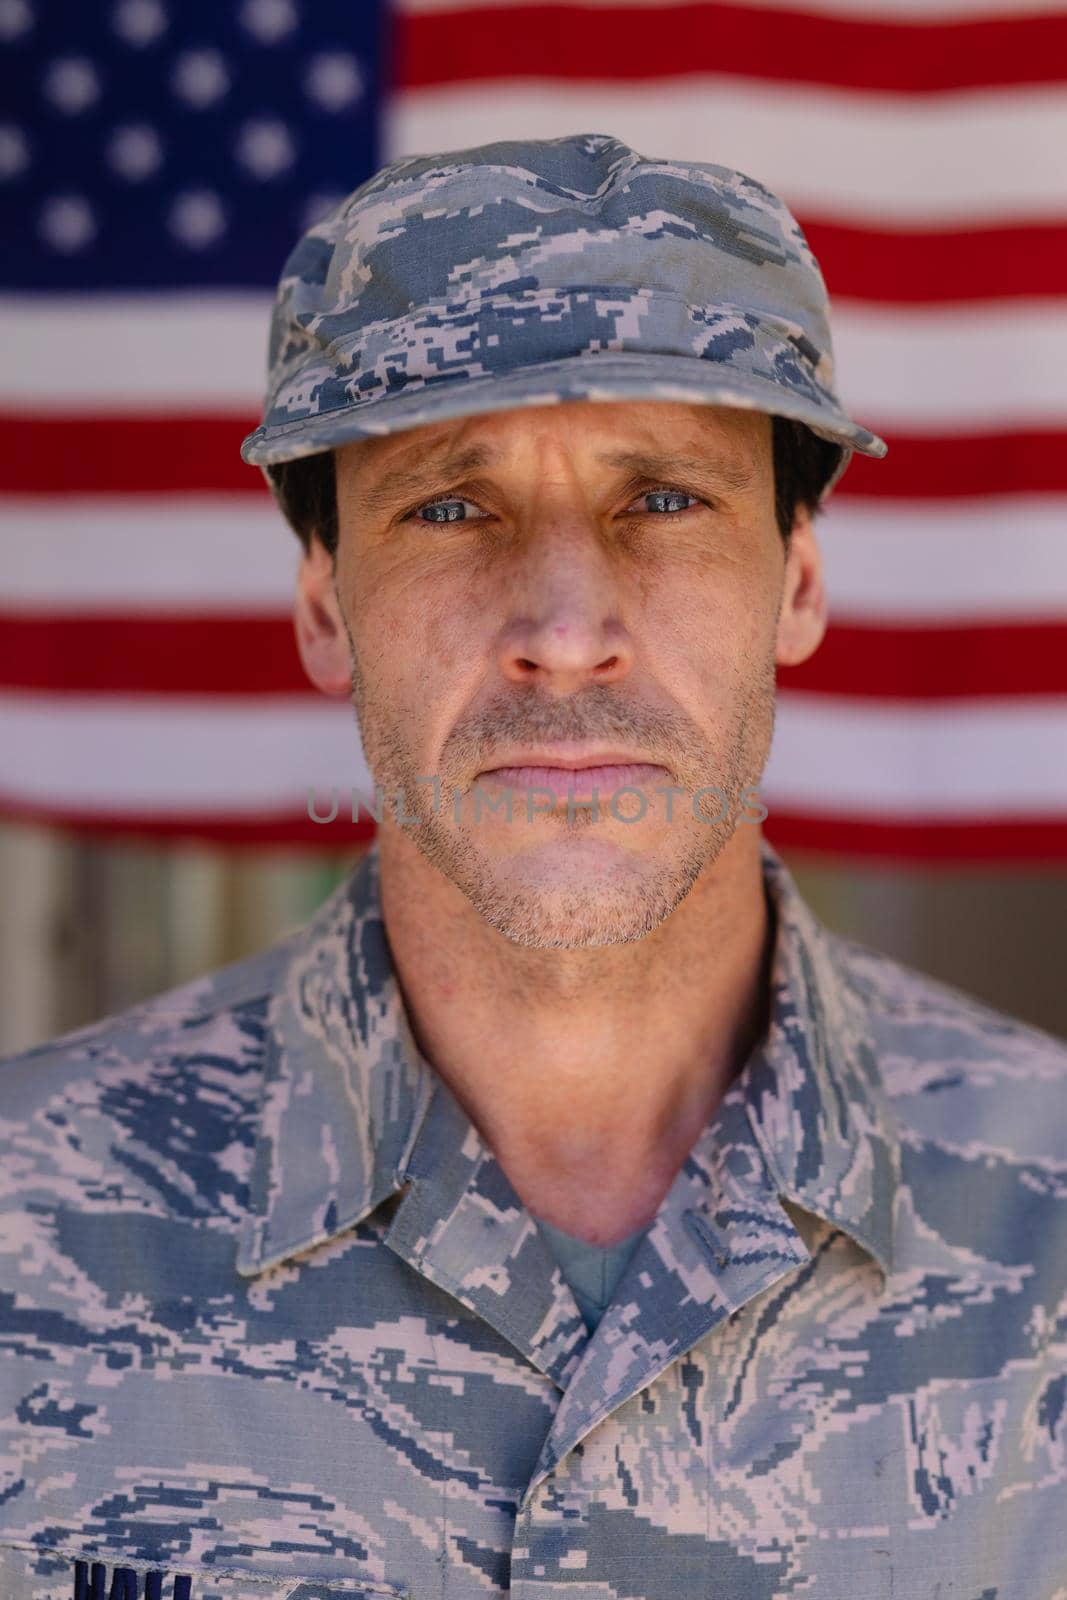 Portrait of confident army soldier wearing cap and camouflage uniform against usa flag by Wavebreakmedia